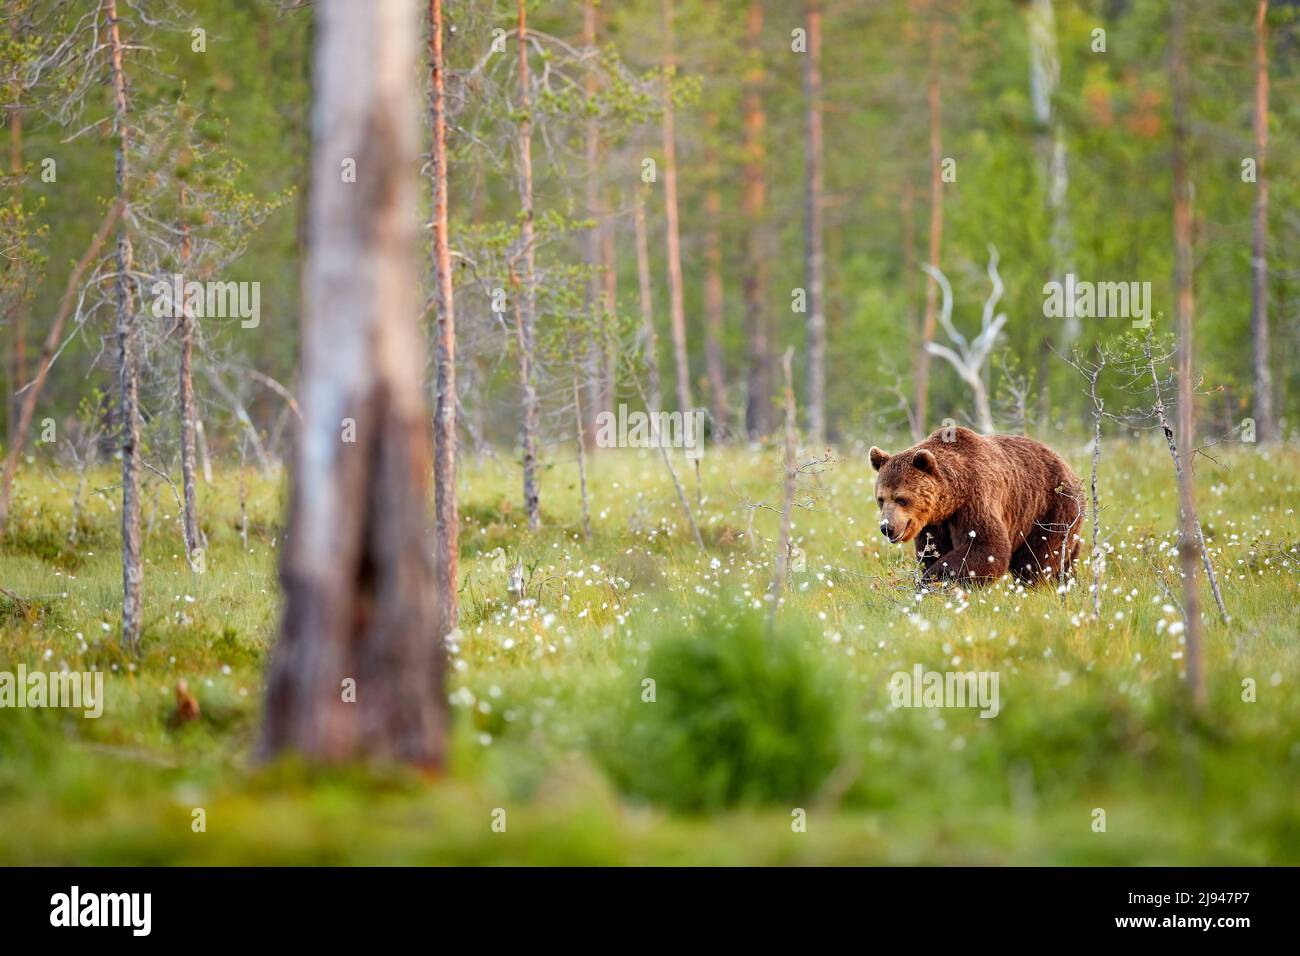 Summer wildlife, brown bear. Dangerous animal in nature forest and meadow habitat. Wildlife scene from Finland near Russian border. Stock Photo